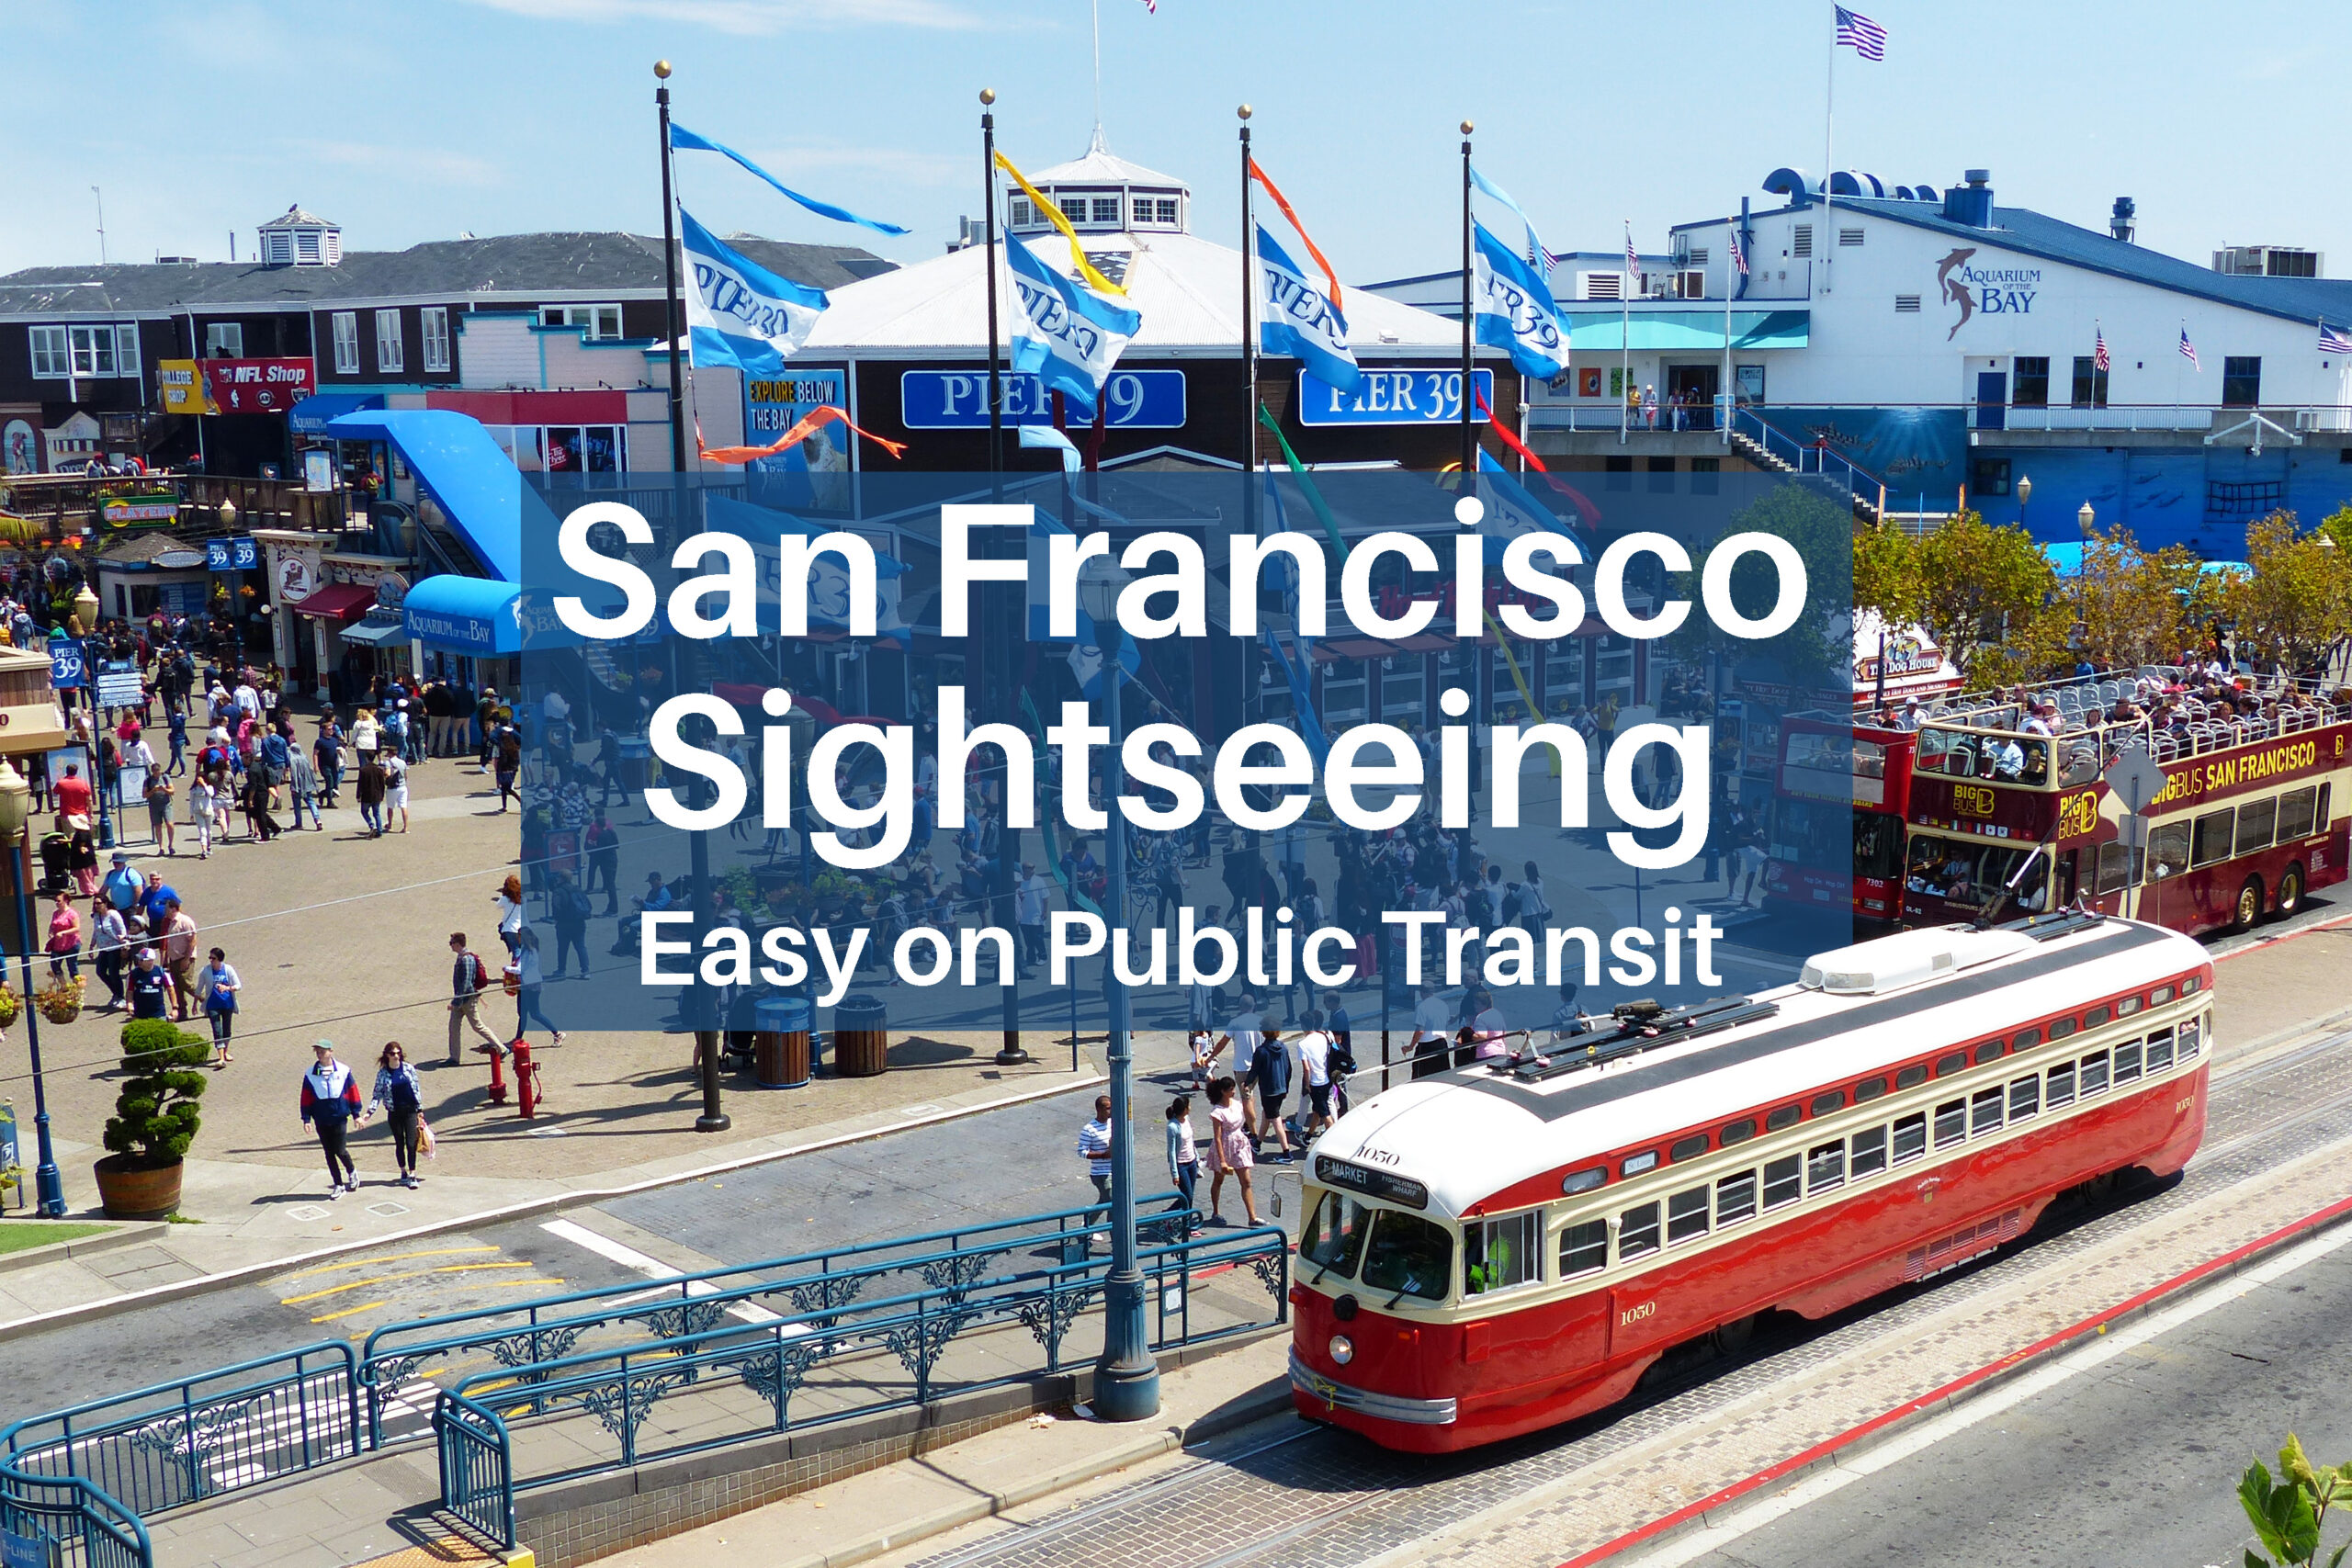 A bright red historic street car arrives at Pier 39 in San Francisco.